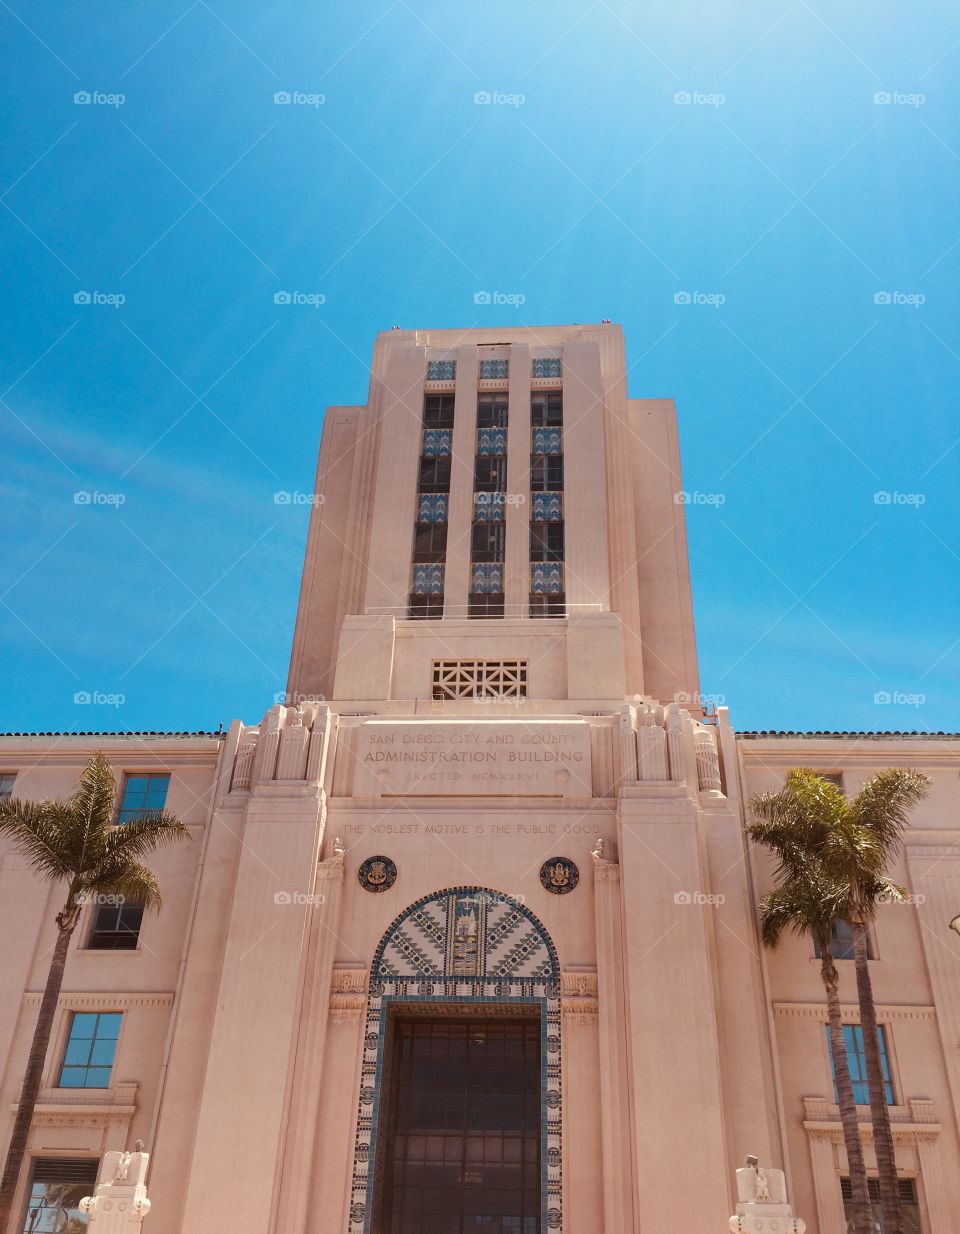 San Diego county administration building